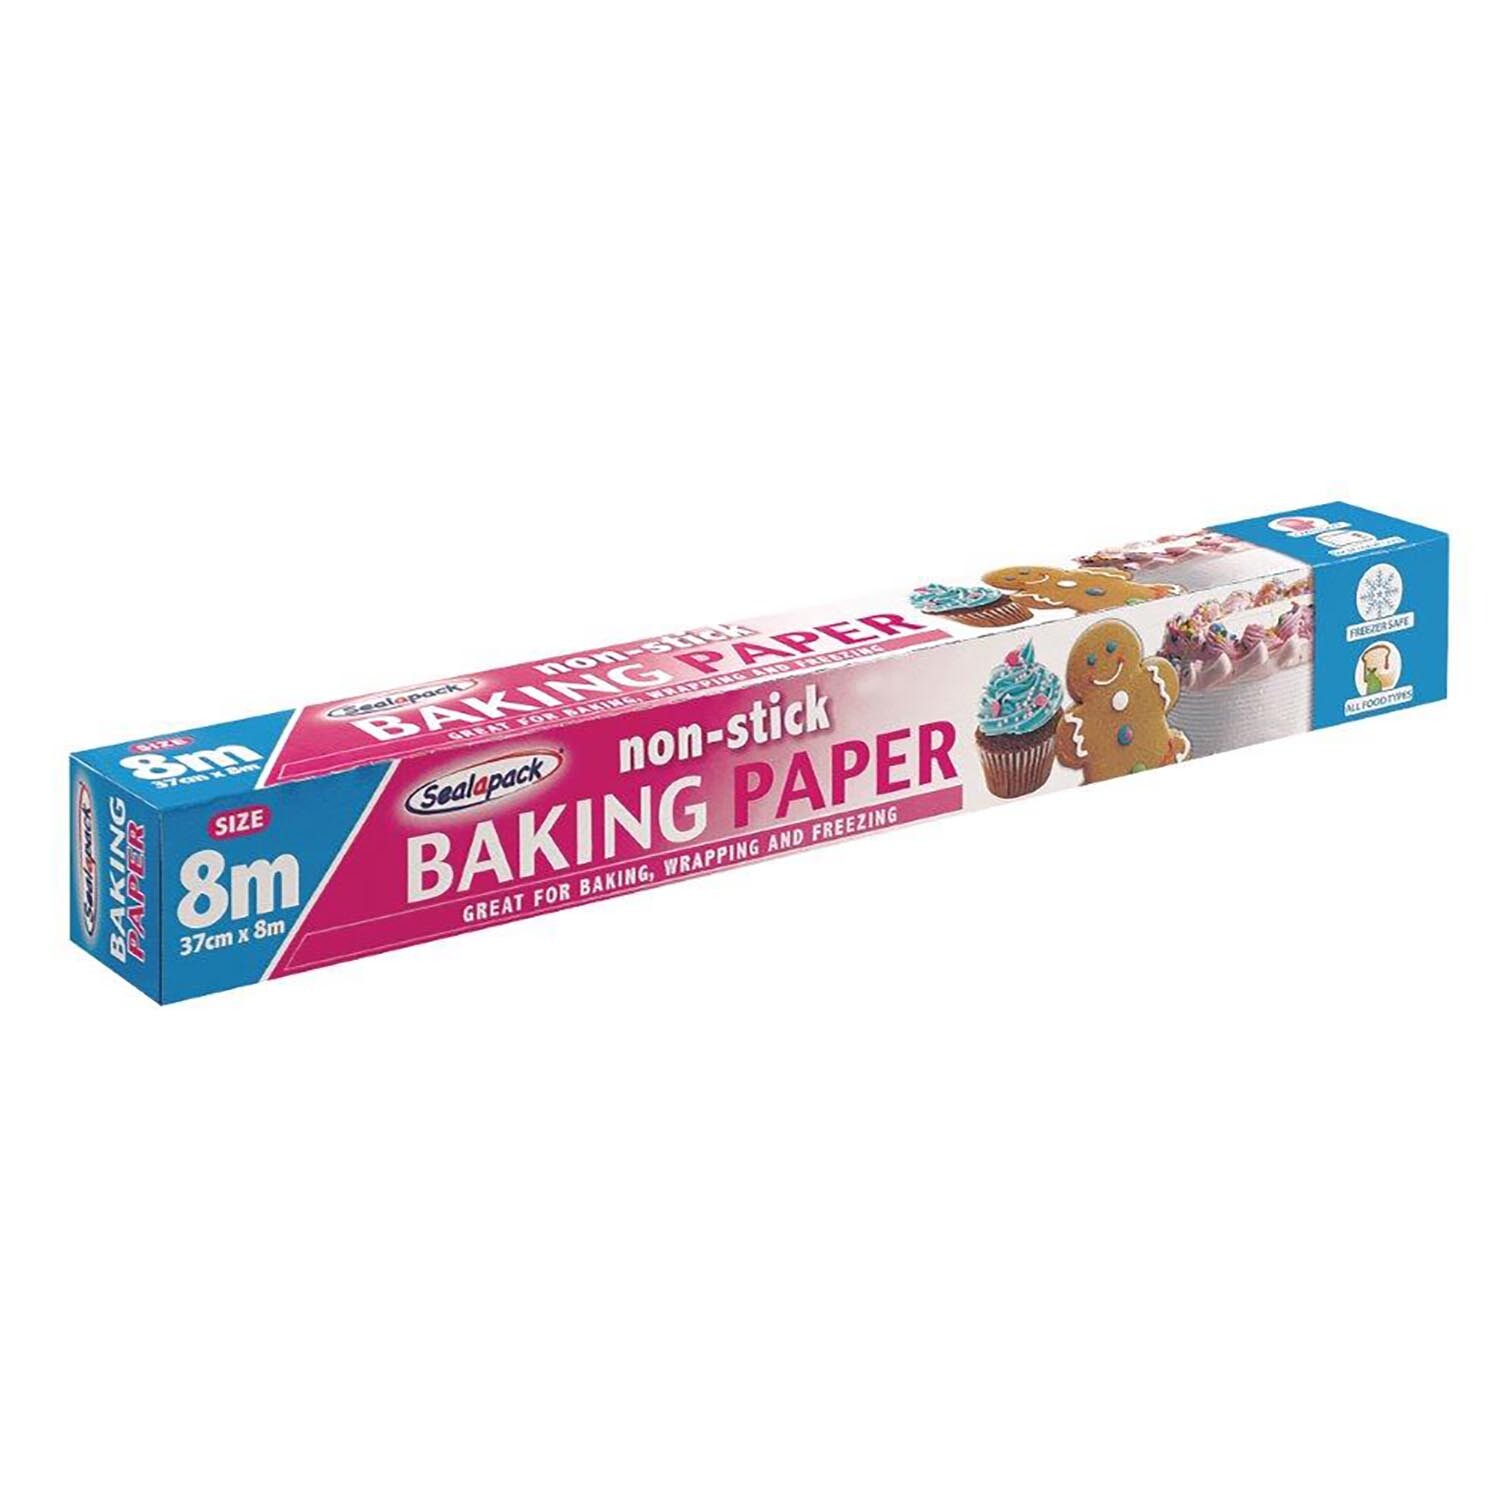 Non-Stick Baking Paper Roll Image